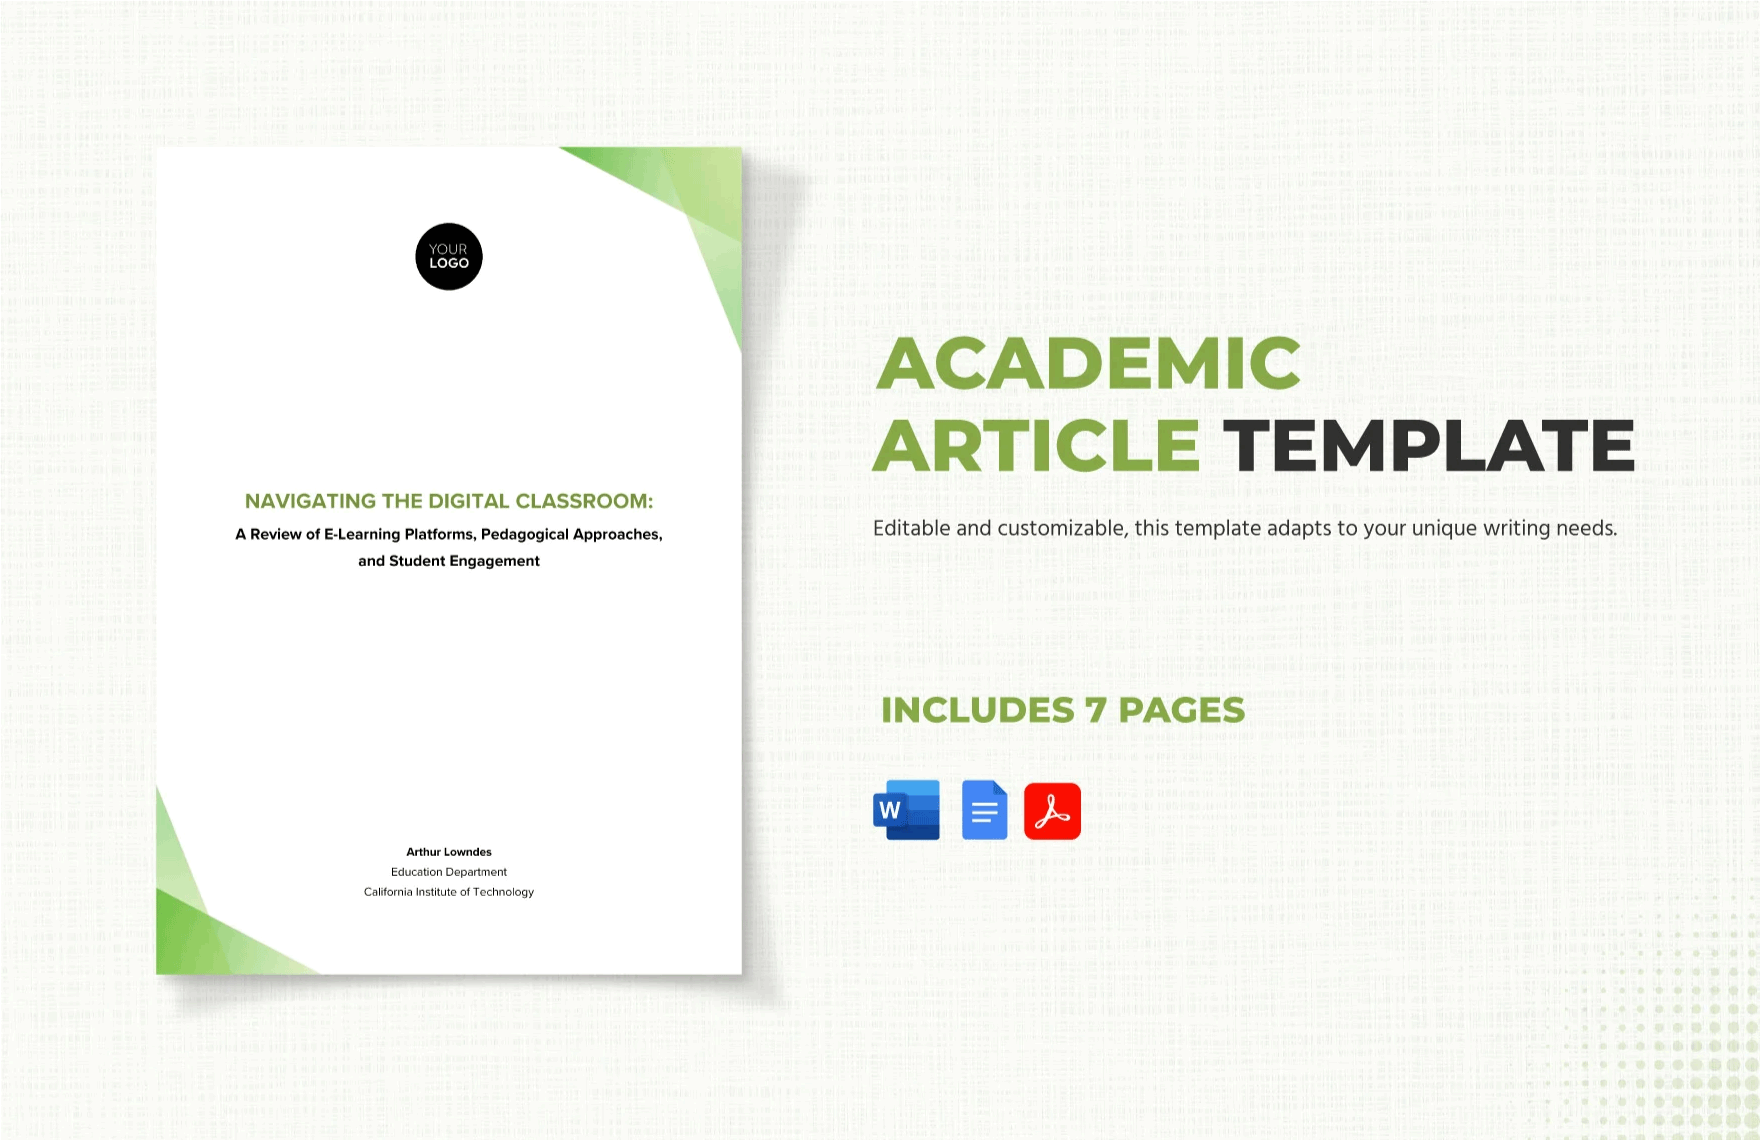 Academic Article Template